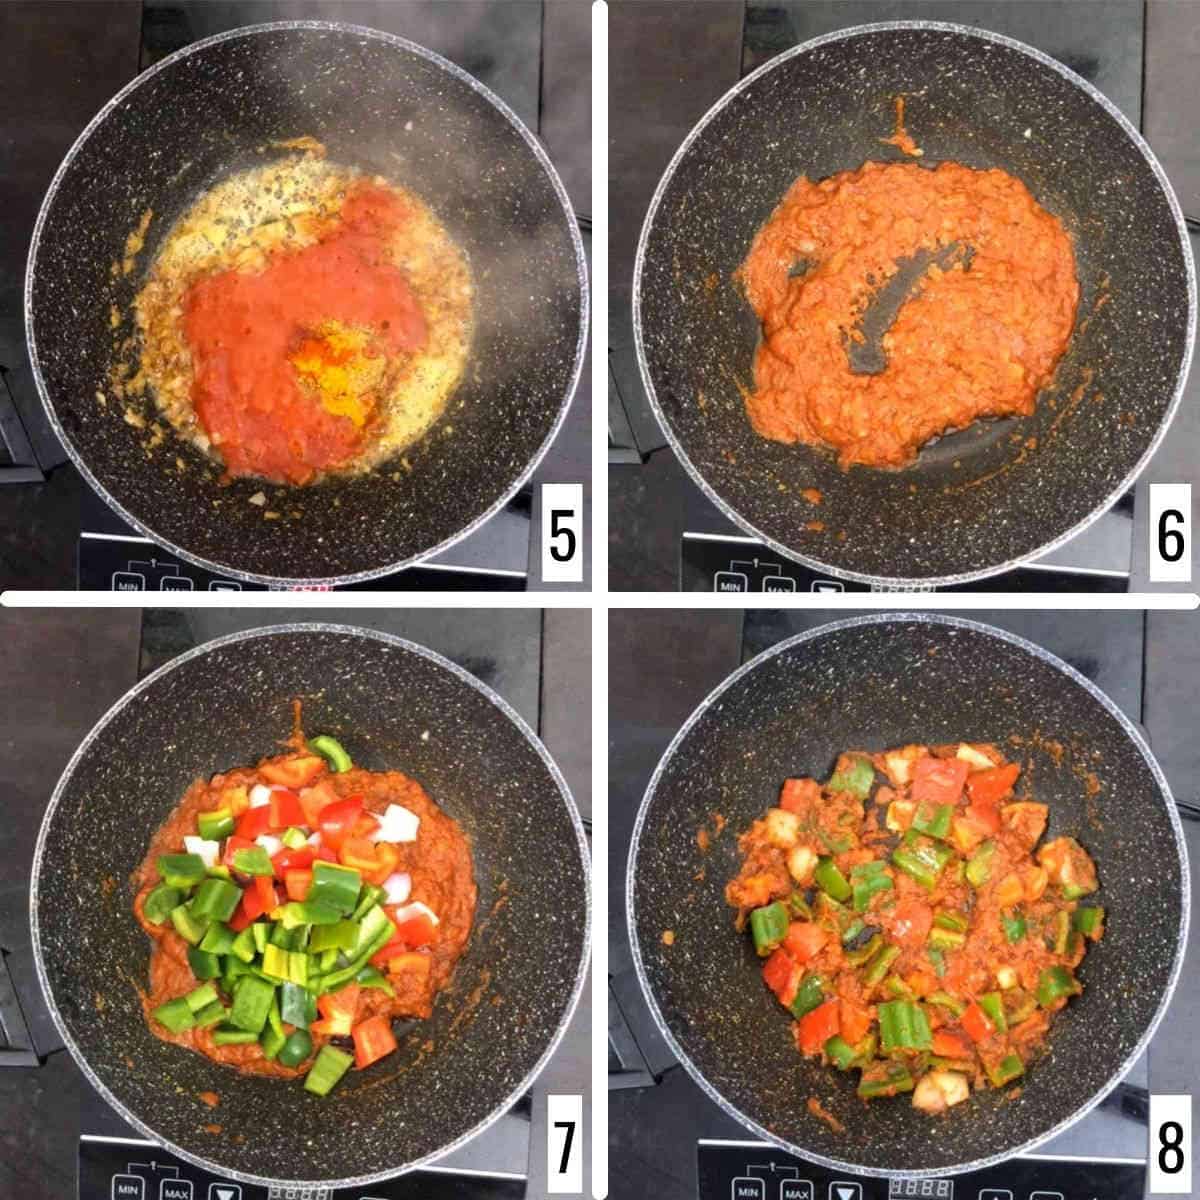 cook tomato. spices, and veggies.